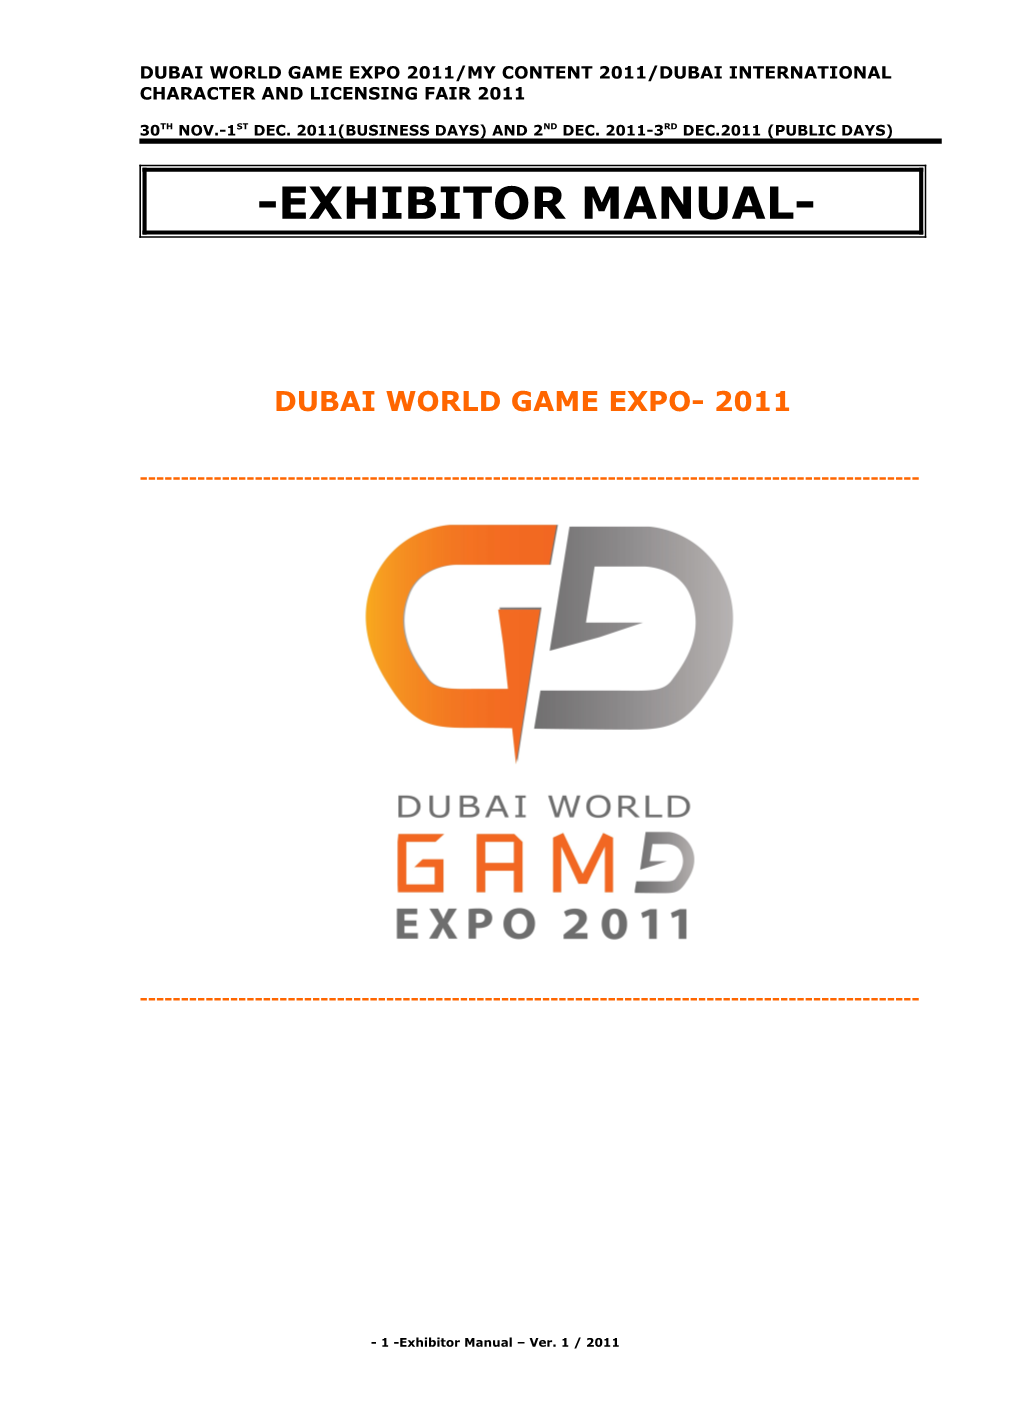 Dubai World Game Expo 2011/My Content 2011/Dubai International Character and Licensing